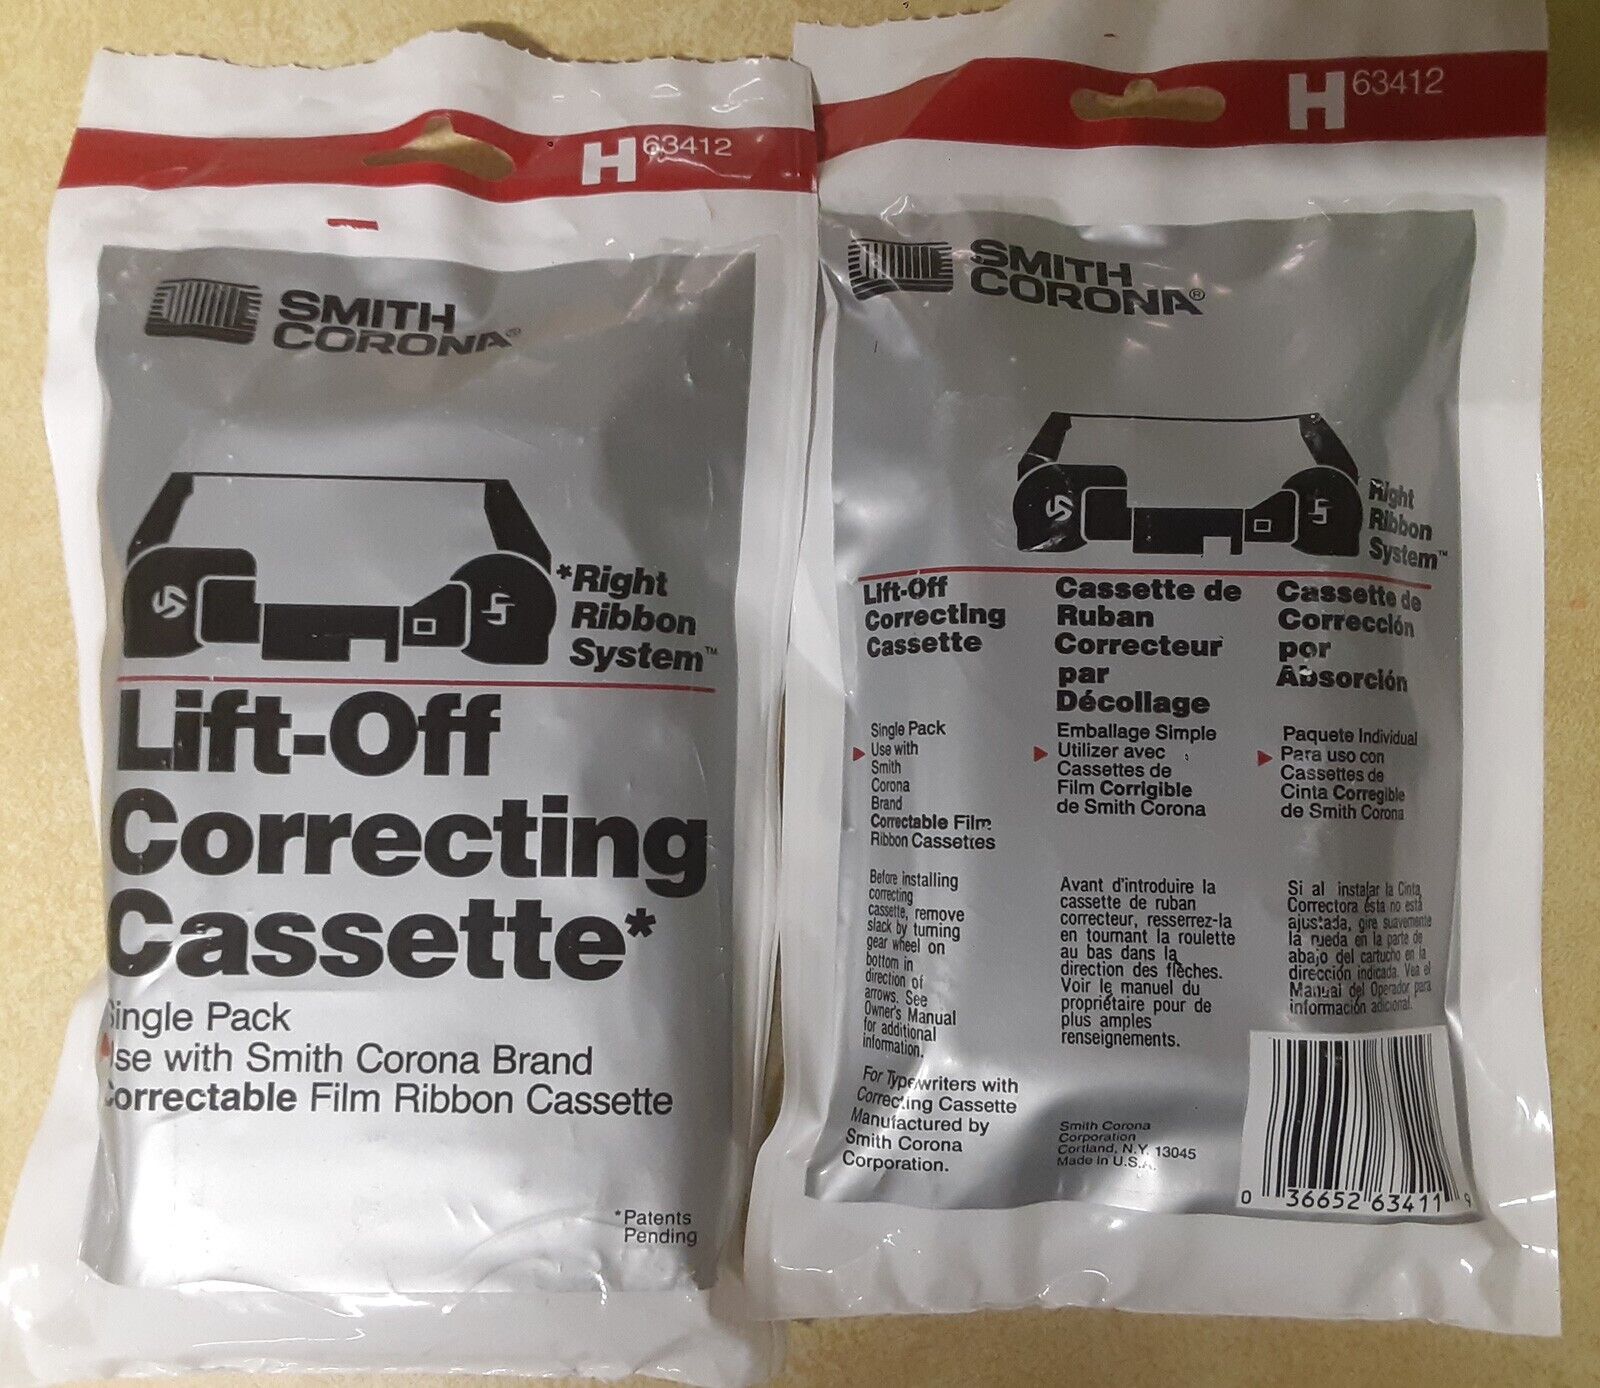 Smith Corona Lift-Off Correcting Cassette H Series H21060 H21560 H63412 Lot of 4